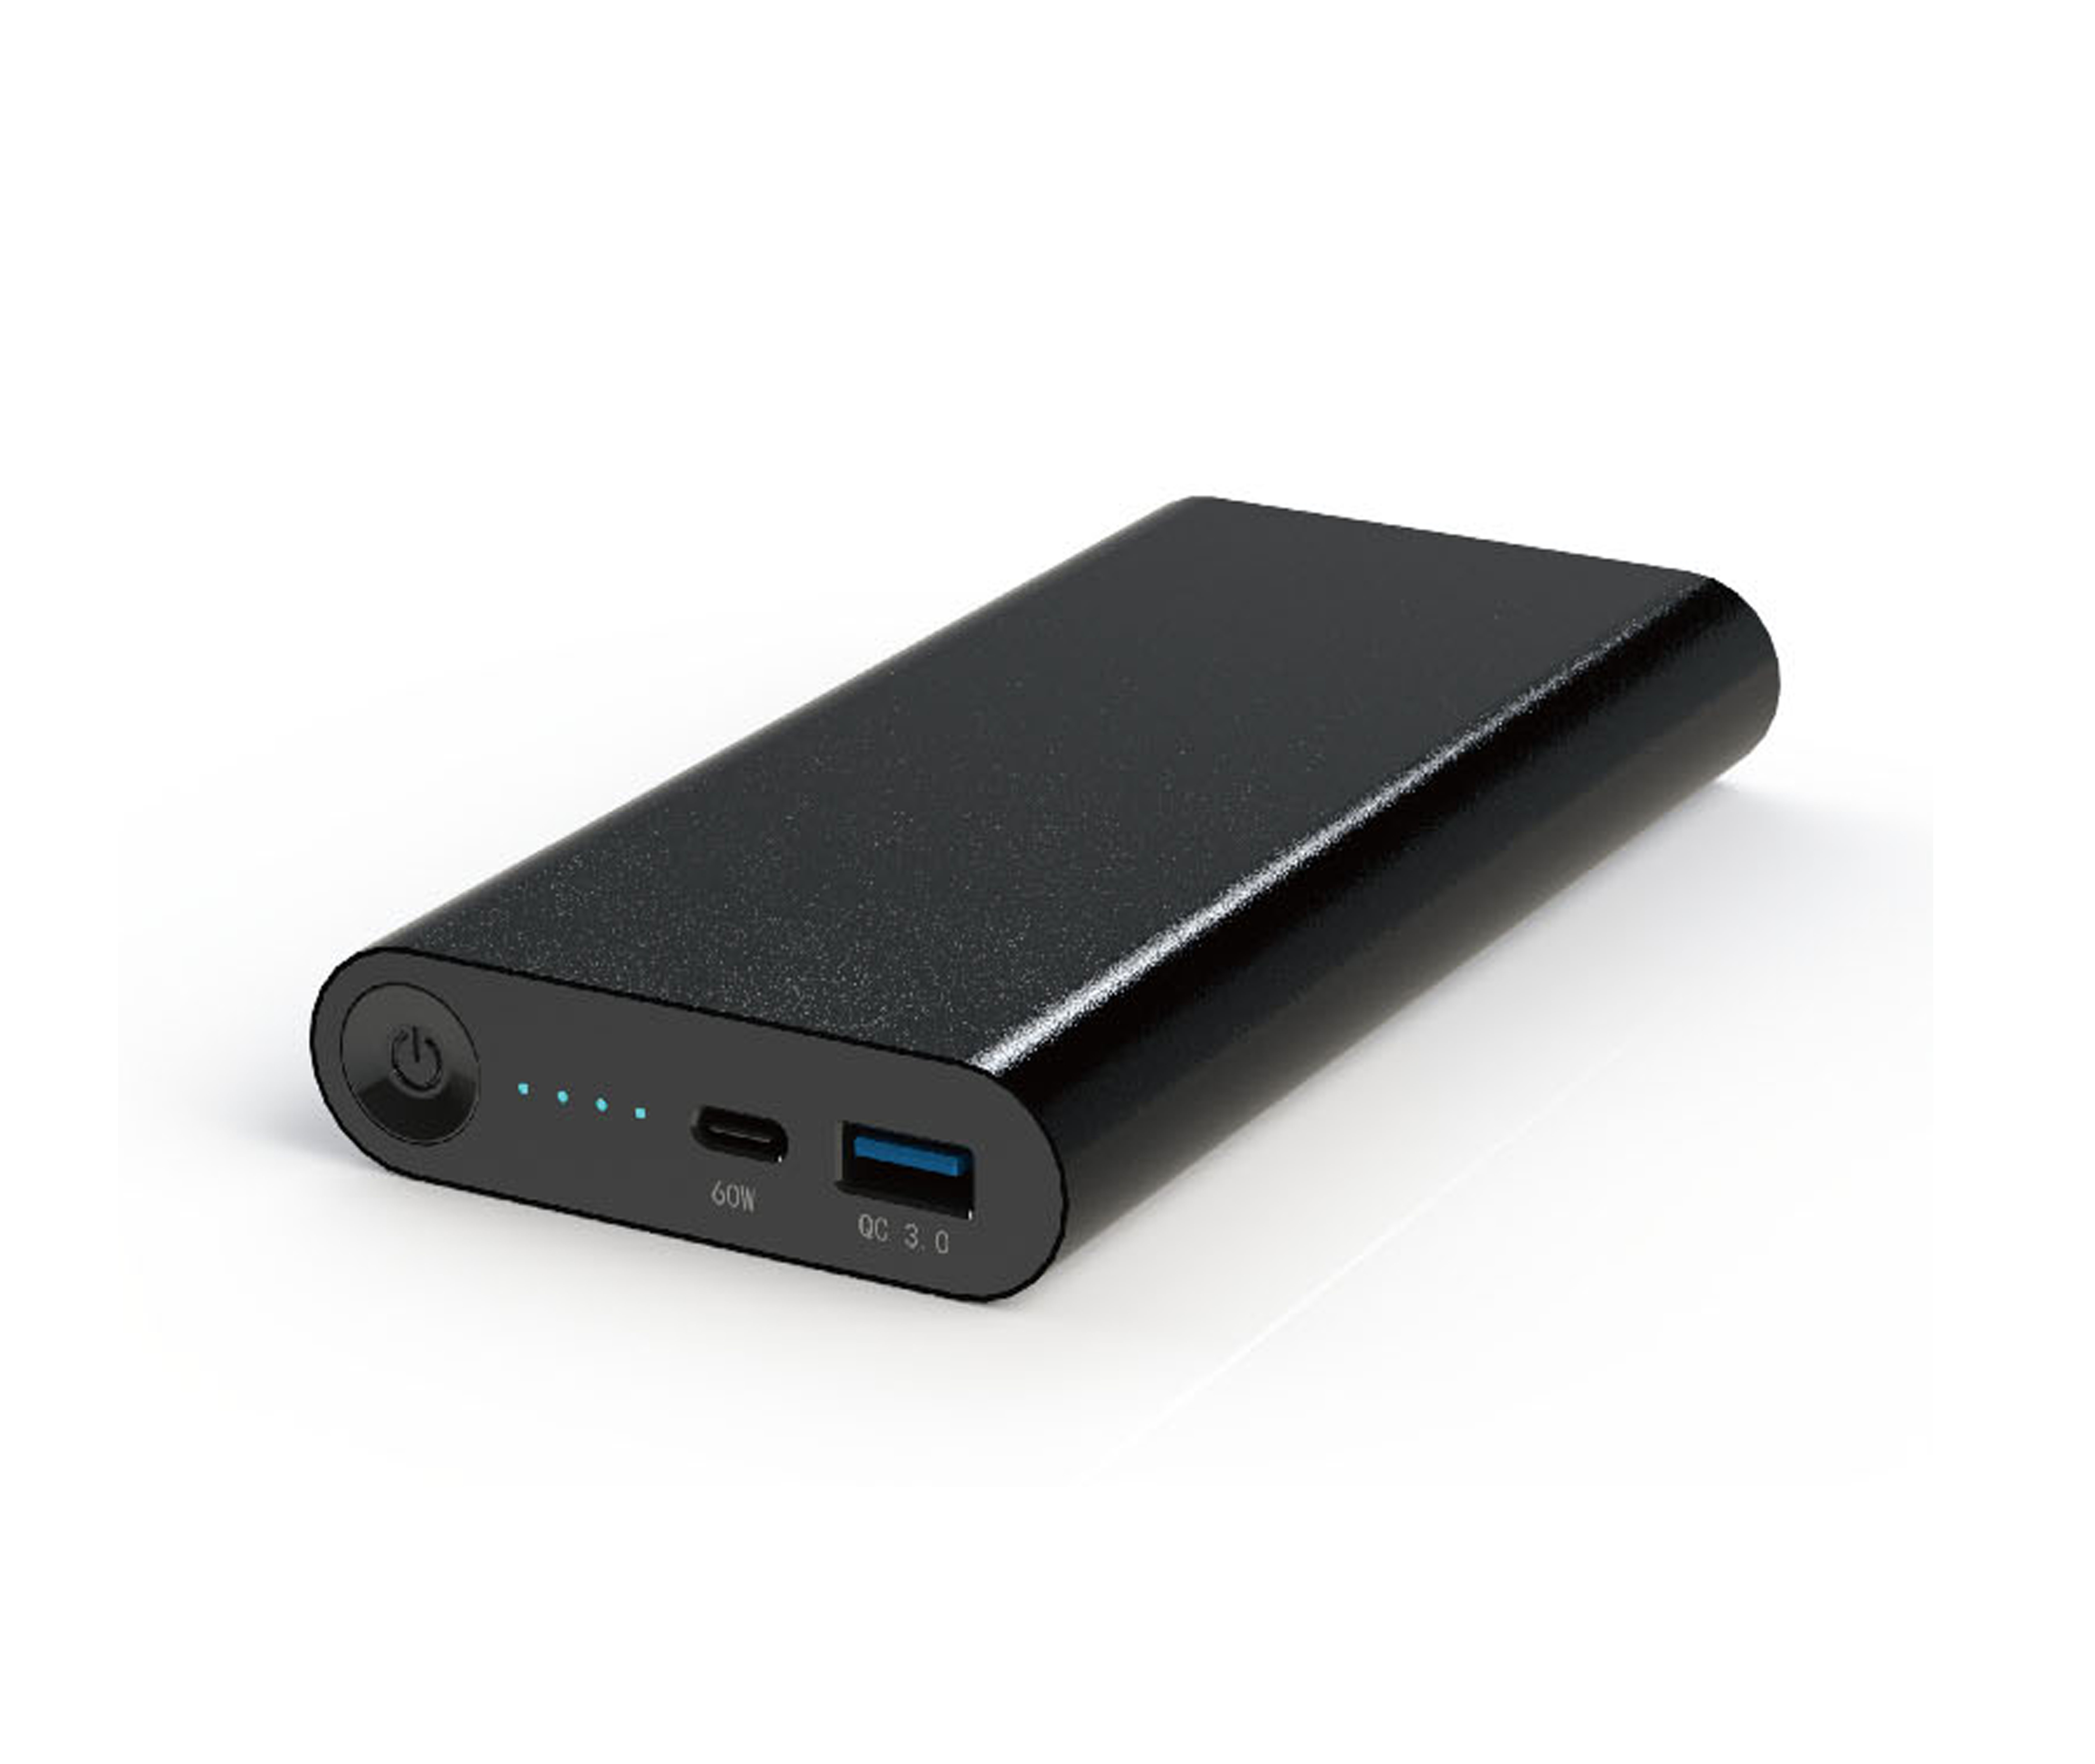 PS-300 PD 60W Power bank